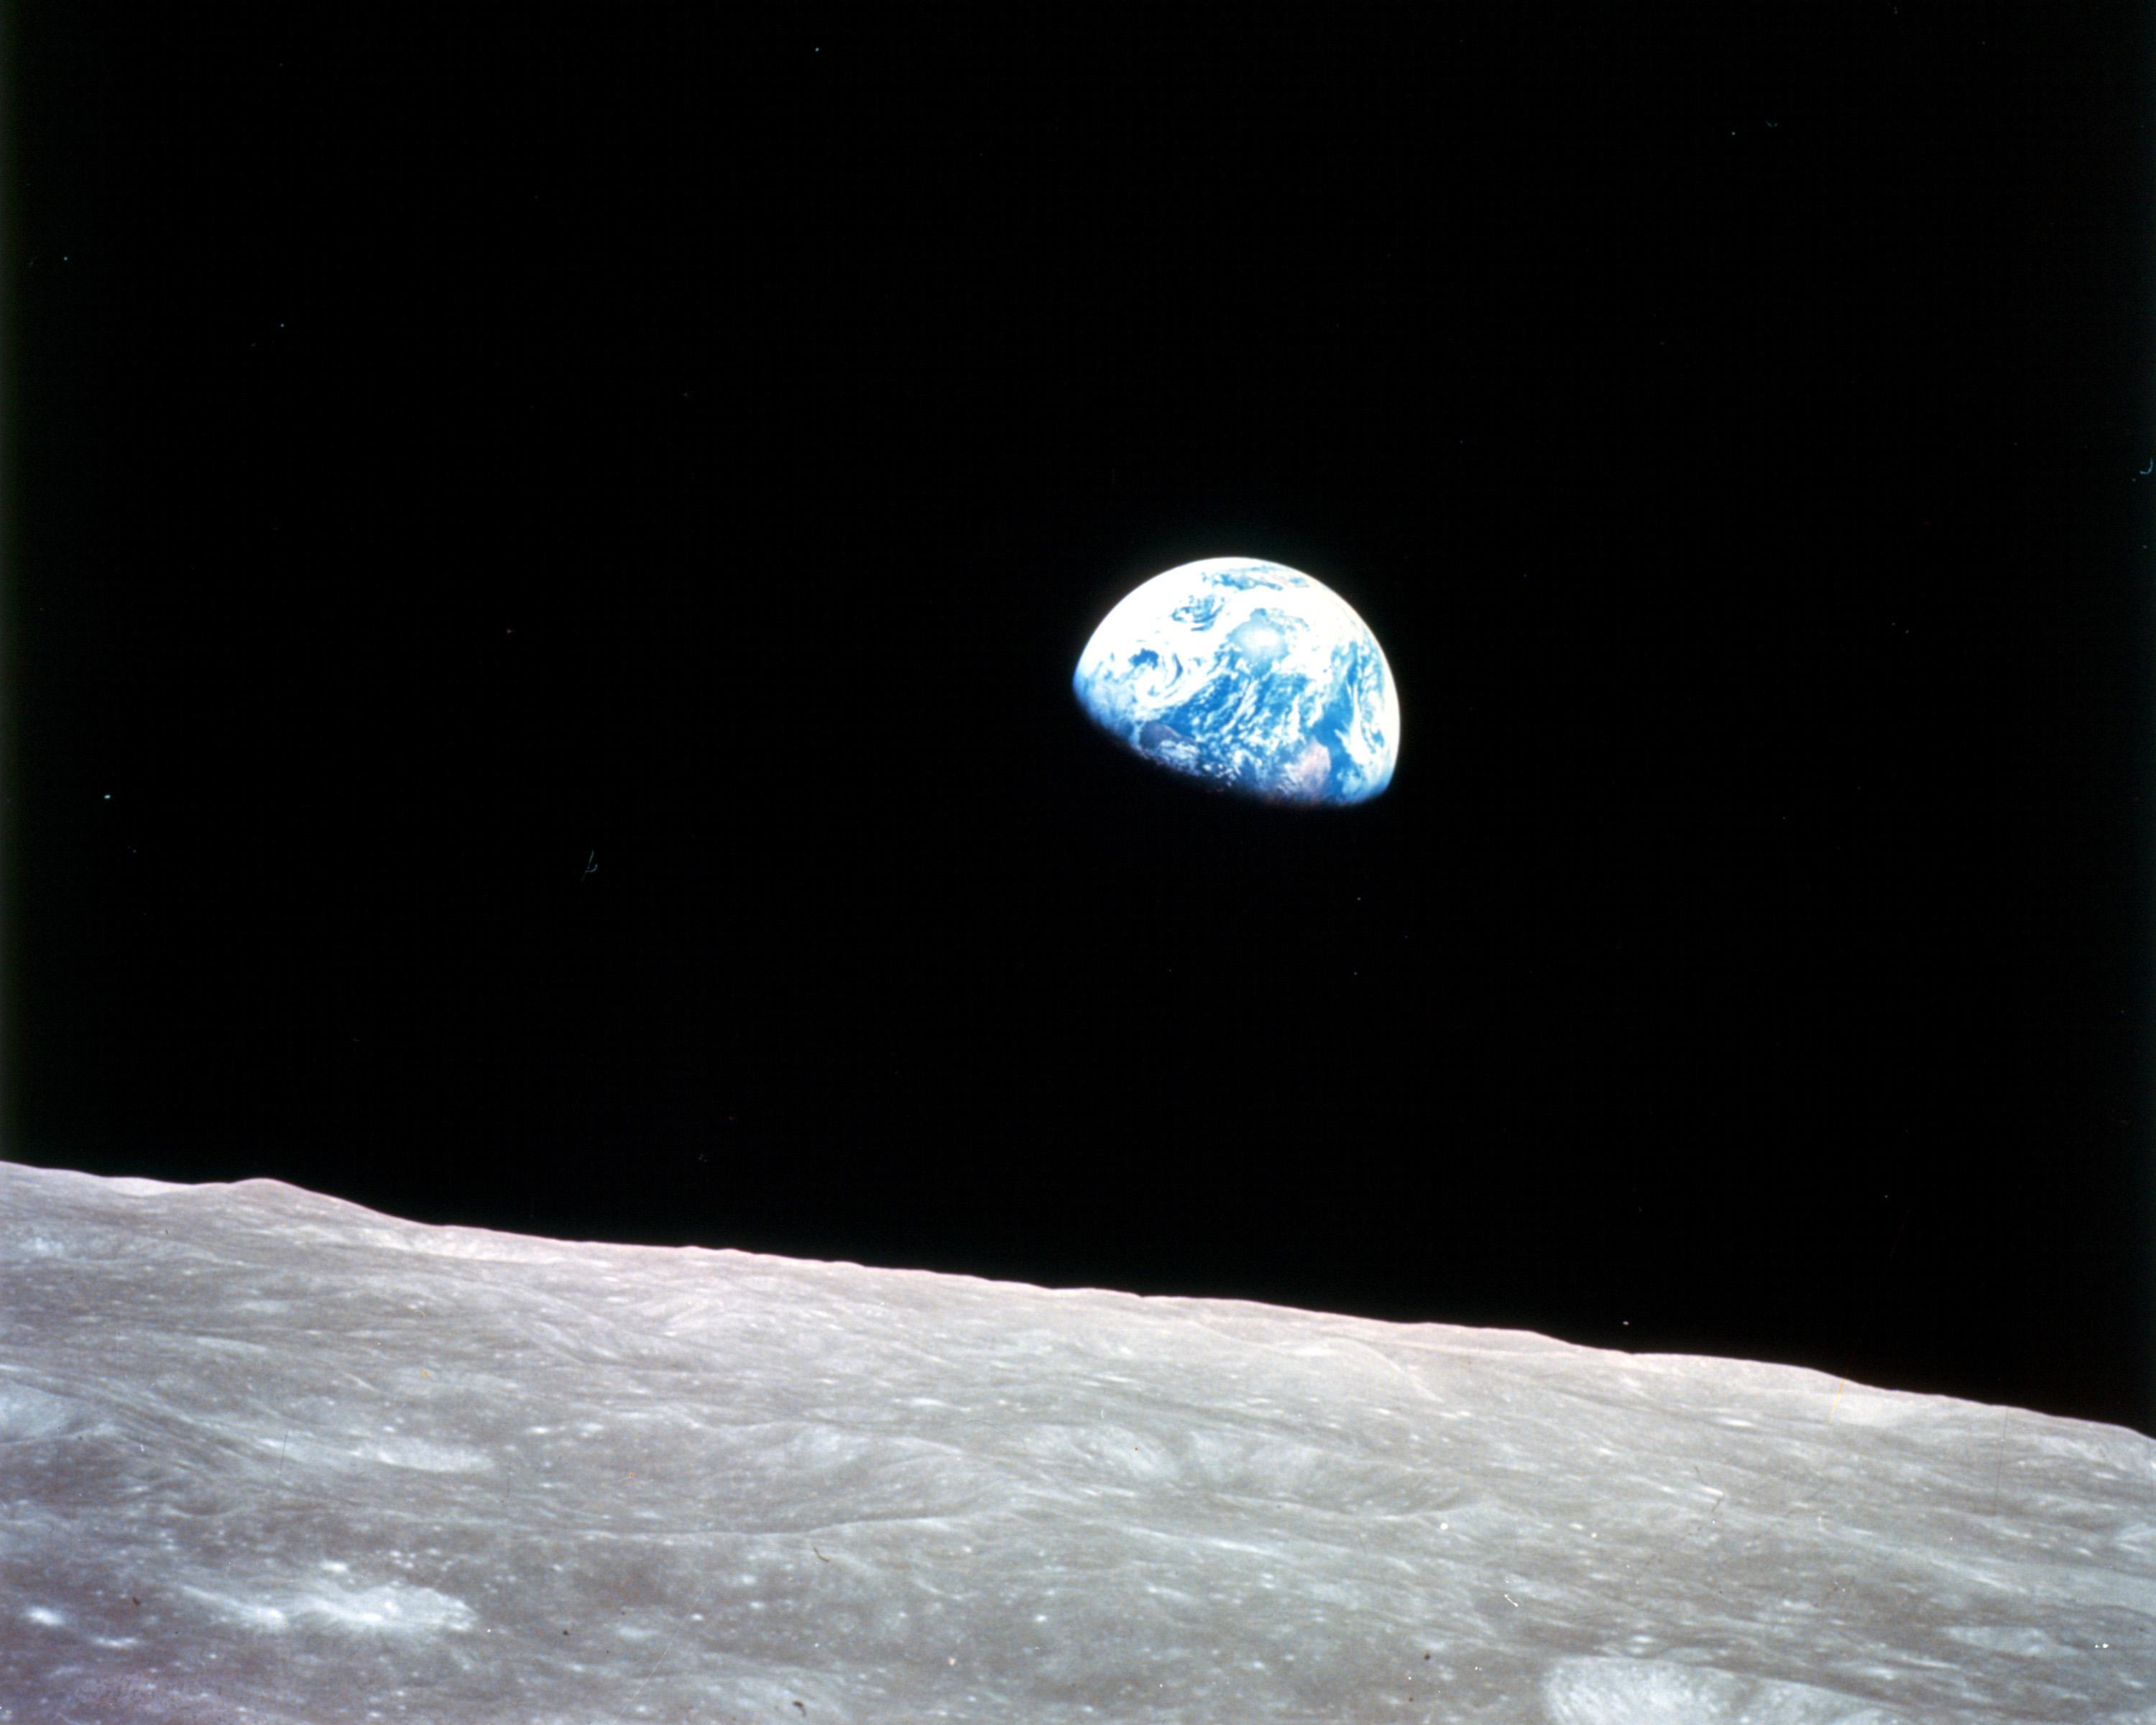 The iconic view of Earth known as "Earthrise" was first captured by astronauts during NASA's Apollo 8 lunar-orbiting mission on Dec. 24, 1968. The photograph is often associated with propelling the environmental movement that led to the establishment of Earth Day in 1970.